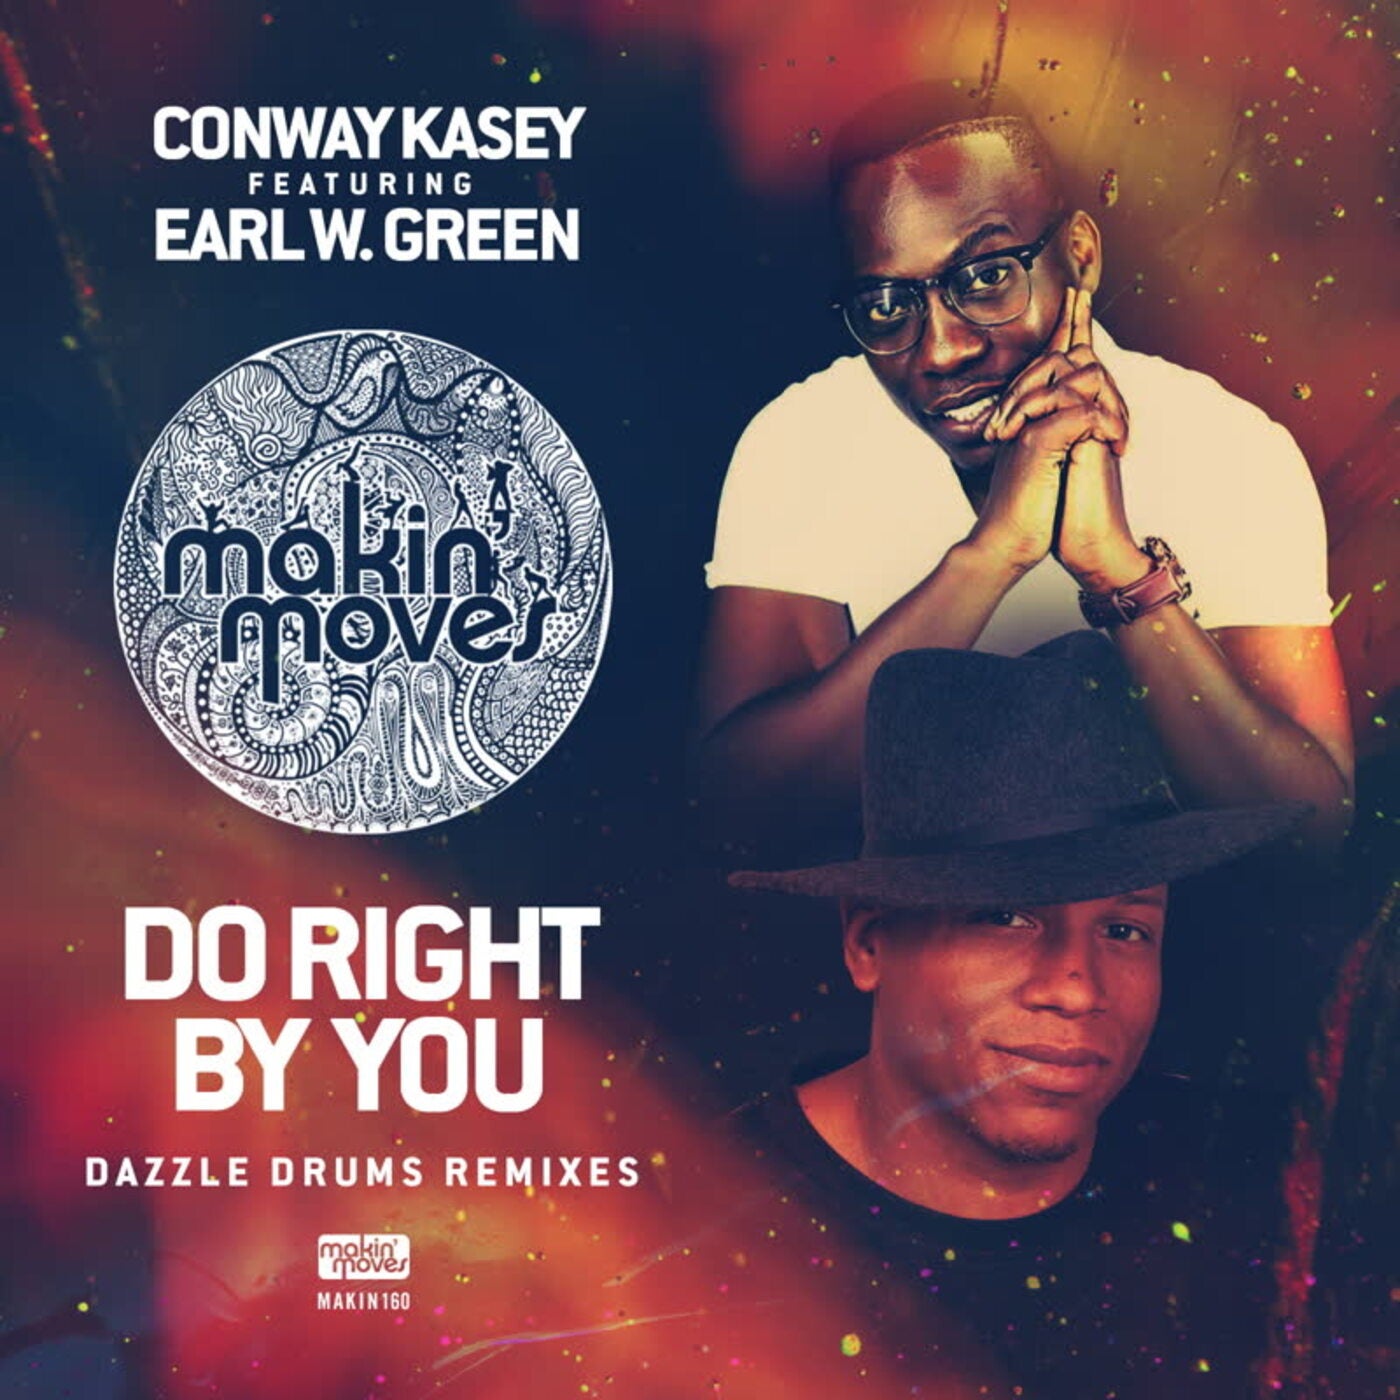 Earl W. Green, Conway Kasey - Do Right By You (Dazzle Drums Remixes) [feat. Earl W. Green] [MAKIN160]